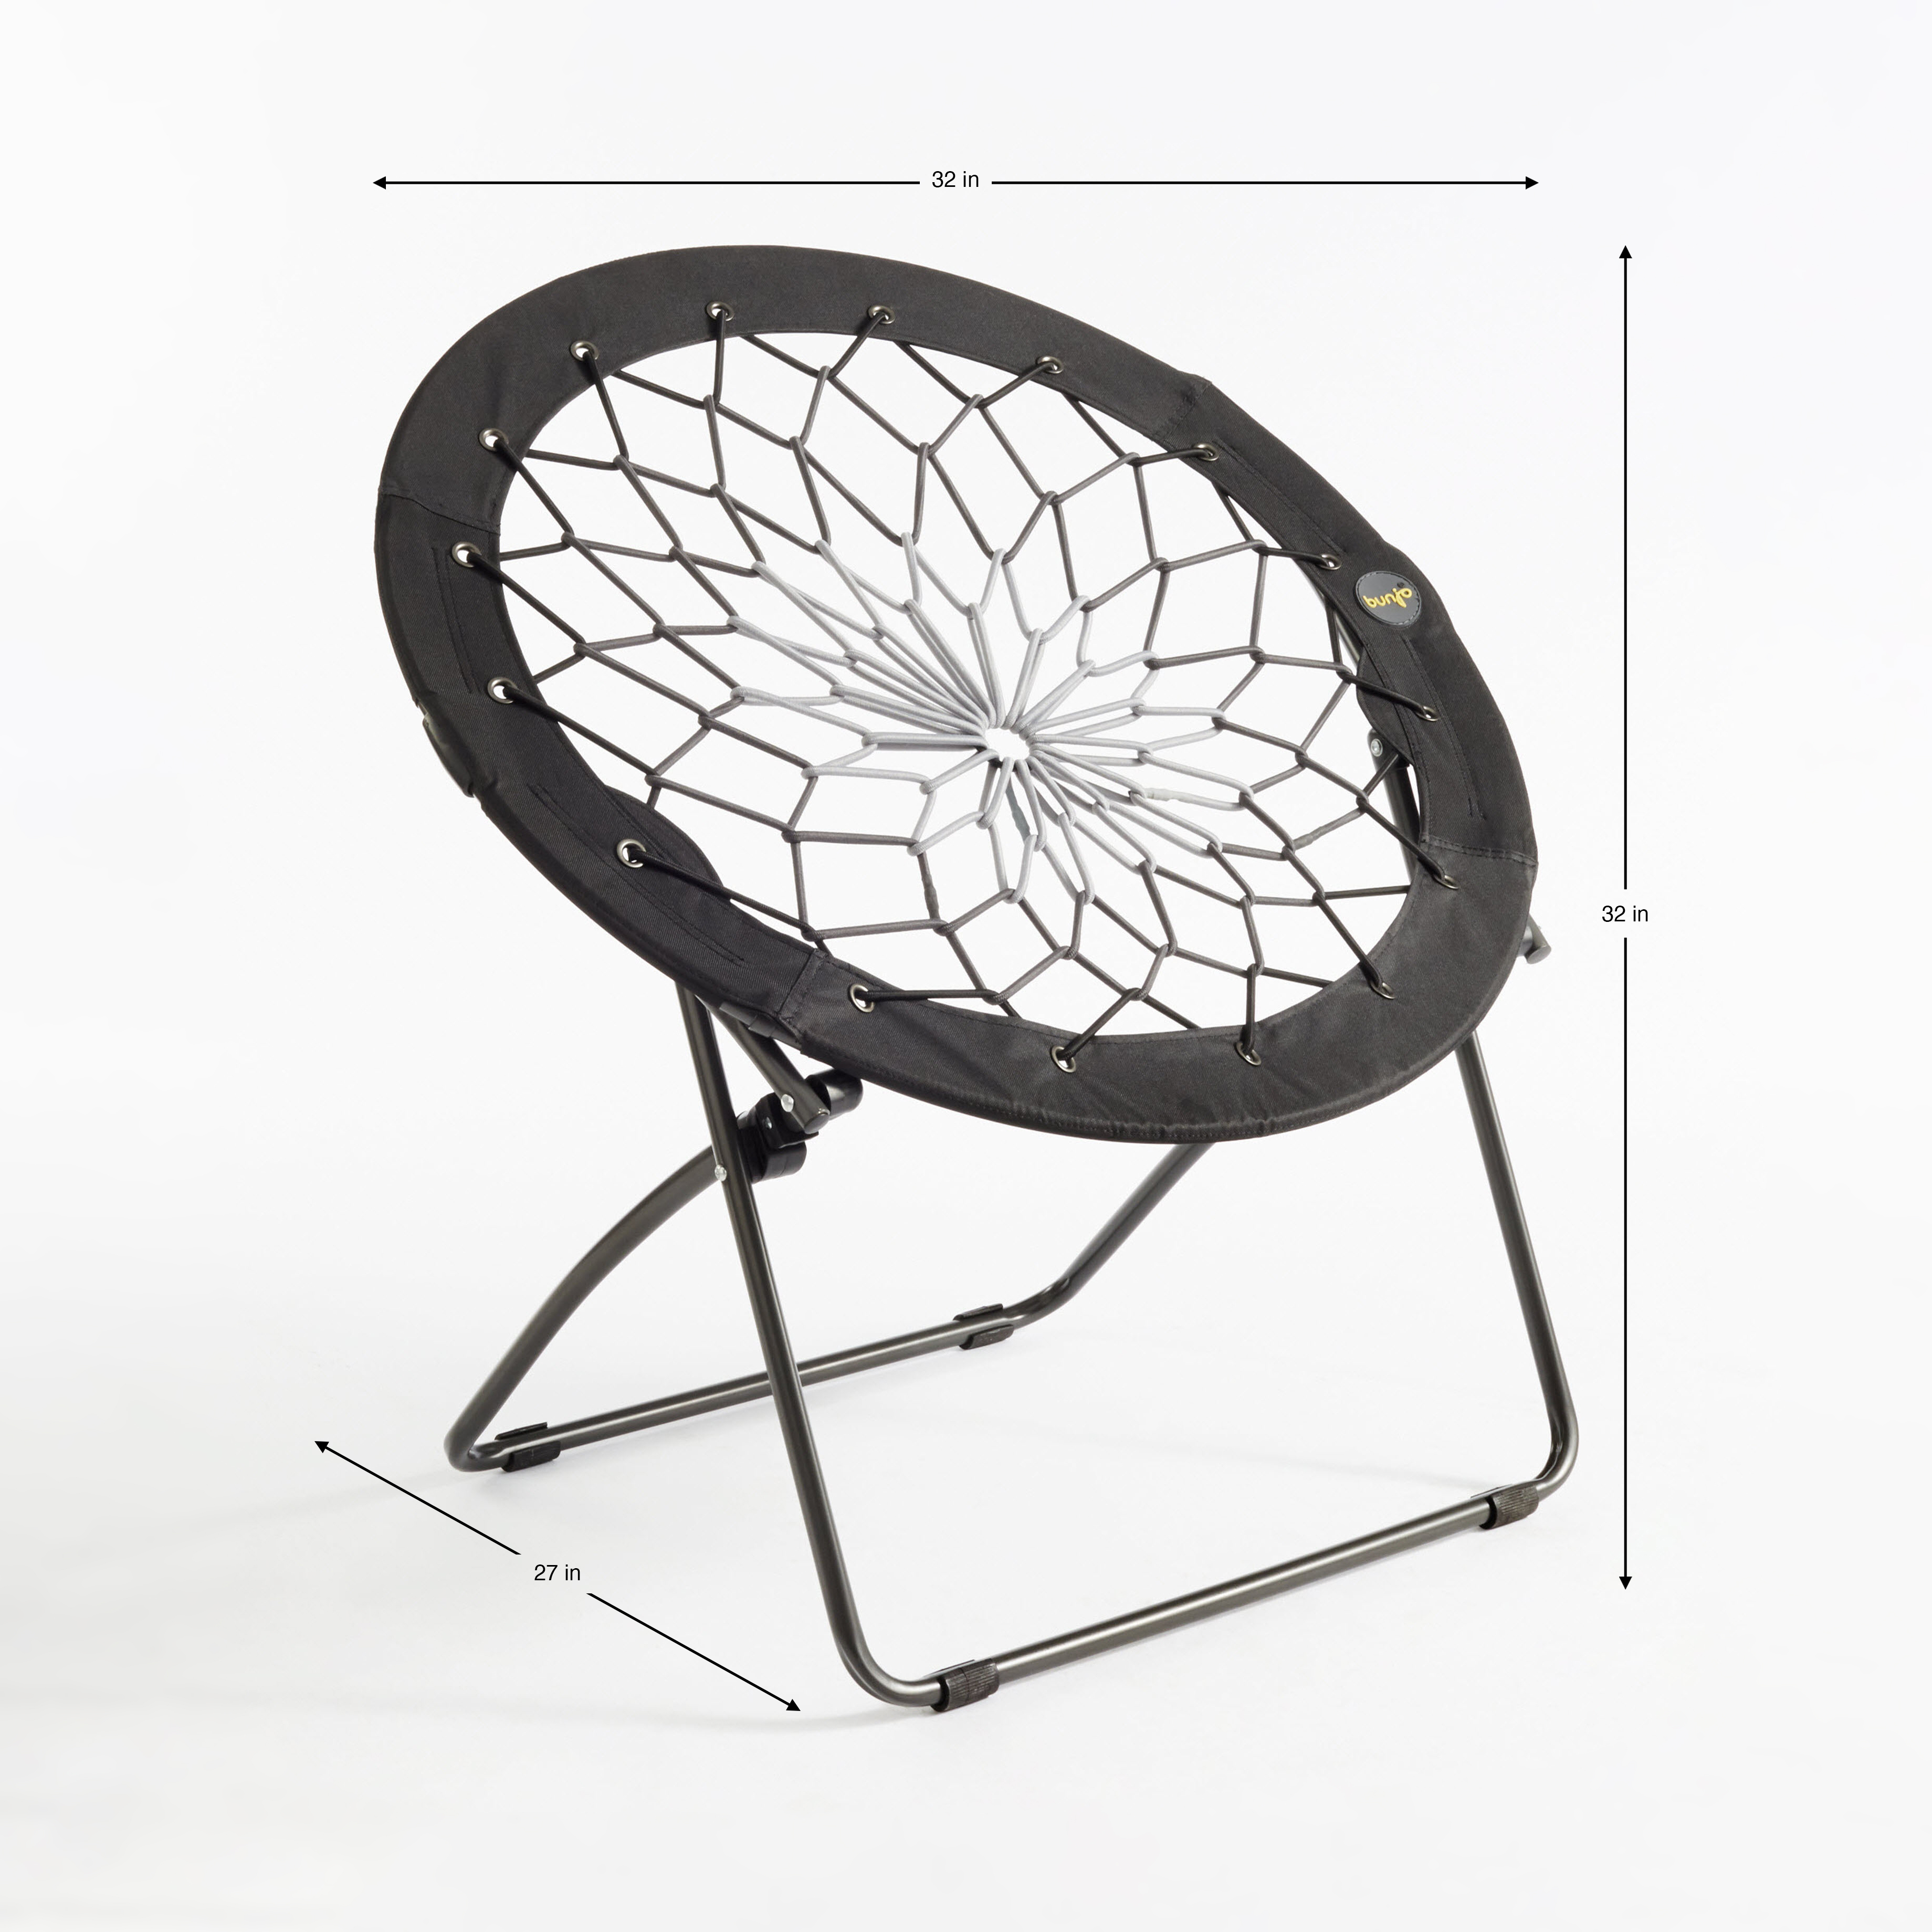 32" Bunjo Woven Bungee with Metal Base Folding Chair, Black to Gray - image 2 of 4